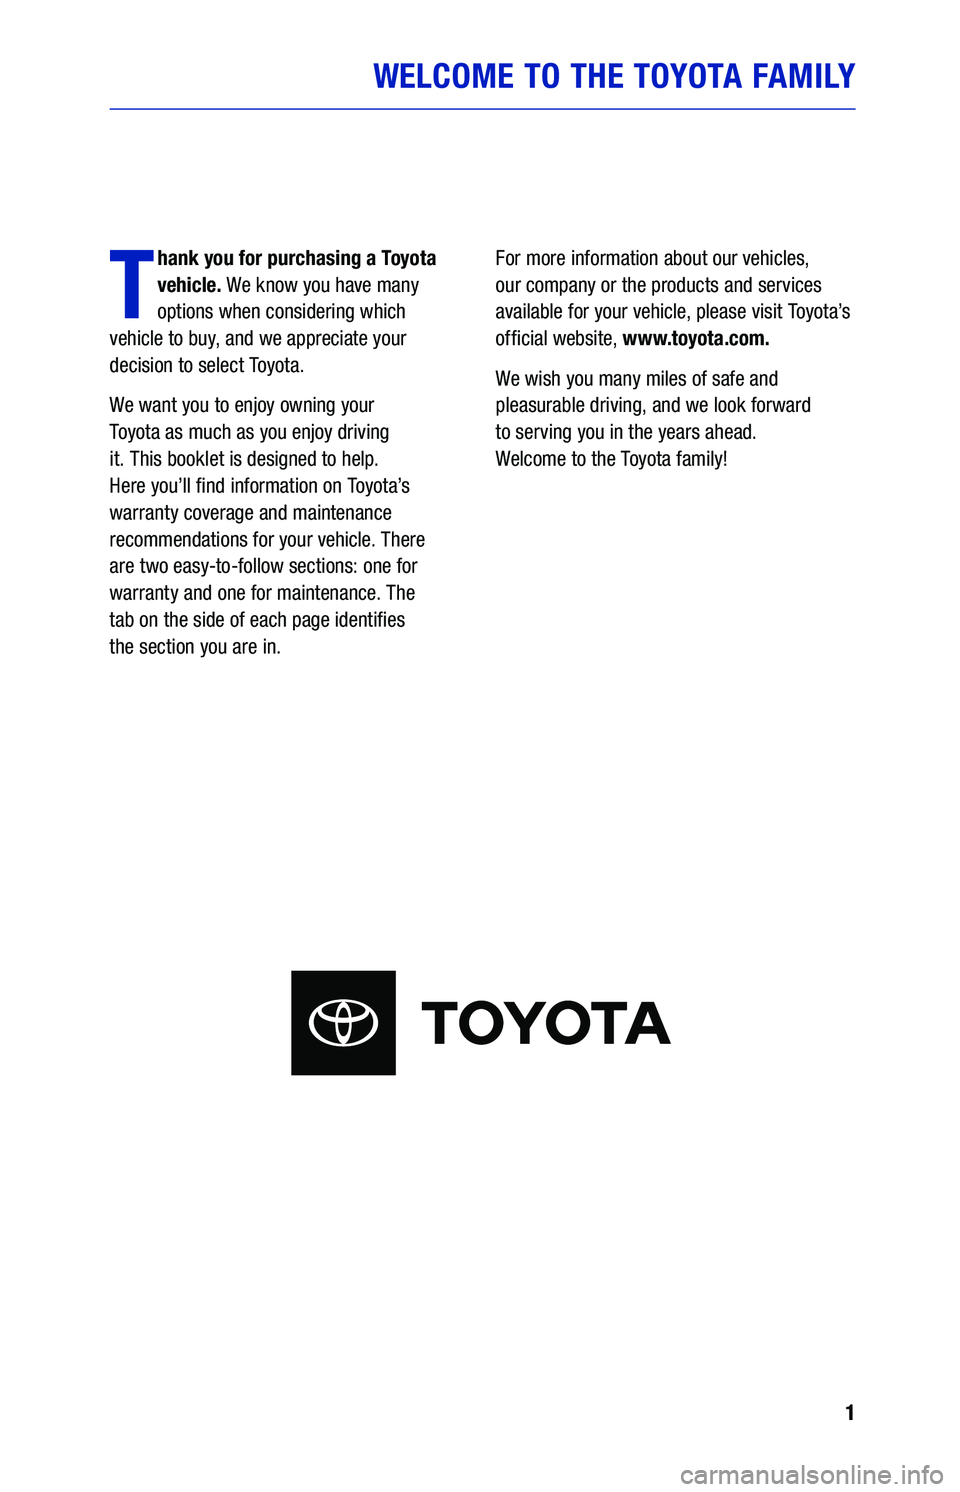 TOYOTA TUNDRA 2021  Warranties & Maintenance Guides (in English) 1
WELCOME TO THE  TOYOTA  FAMILY
T
hank you for purchasing  a Toyota 
vehicle.  We know  you have  many  
options  when considering  which  
vehicle  to buy,  and we appreciate  your 
decision  to sel